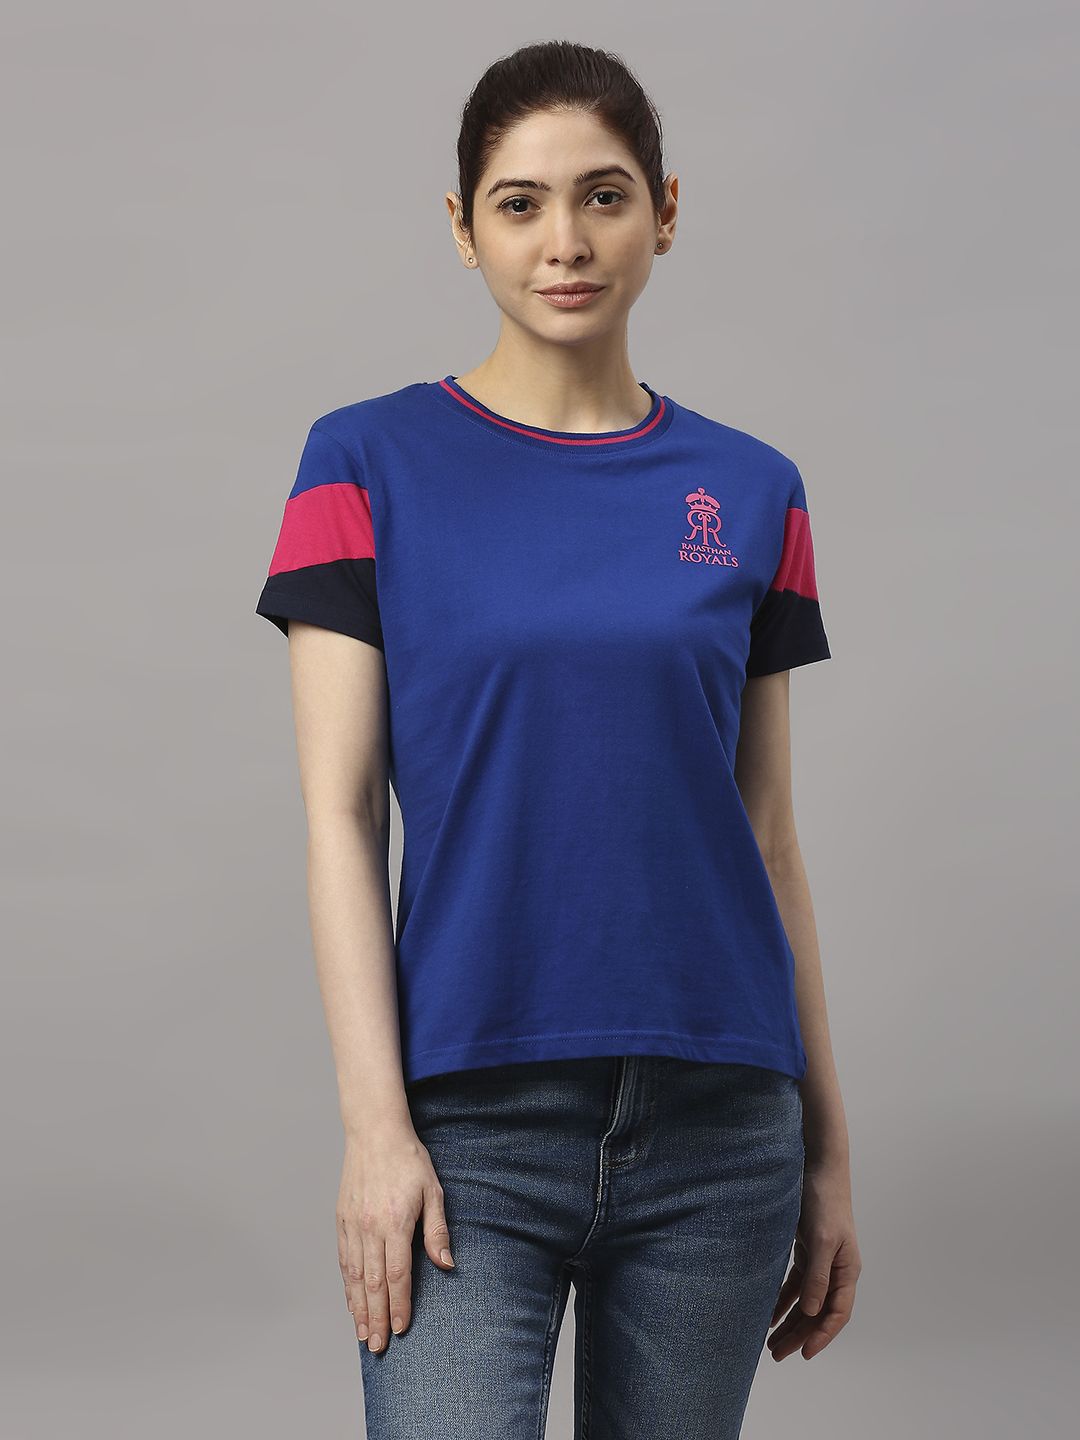 Buy Women Blue Printed Round Neck T-Shirts From Fancode Shop.